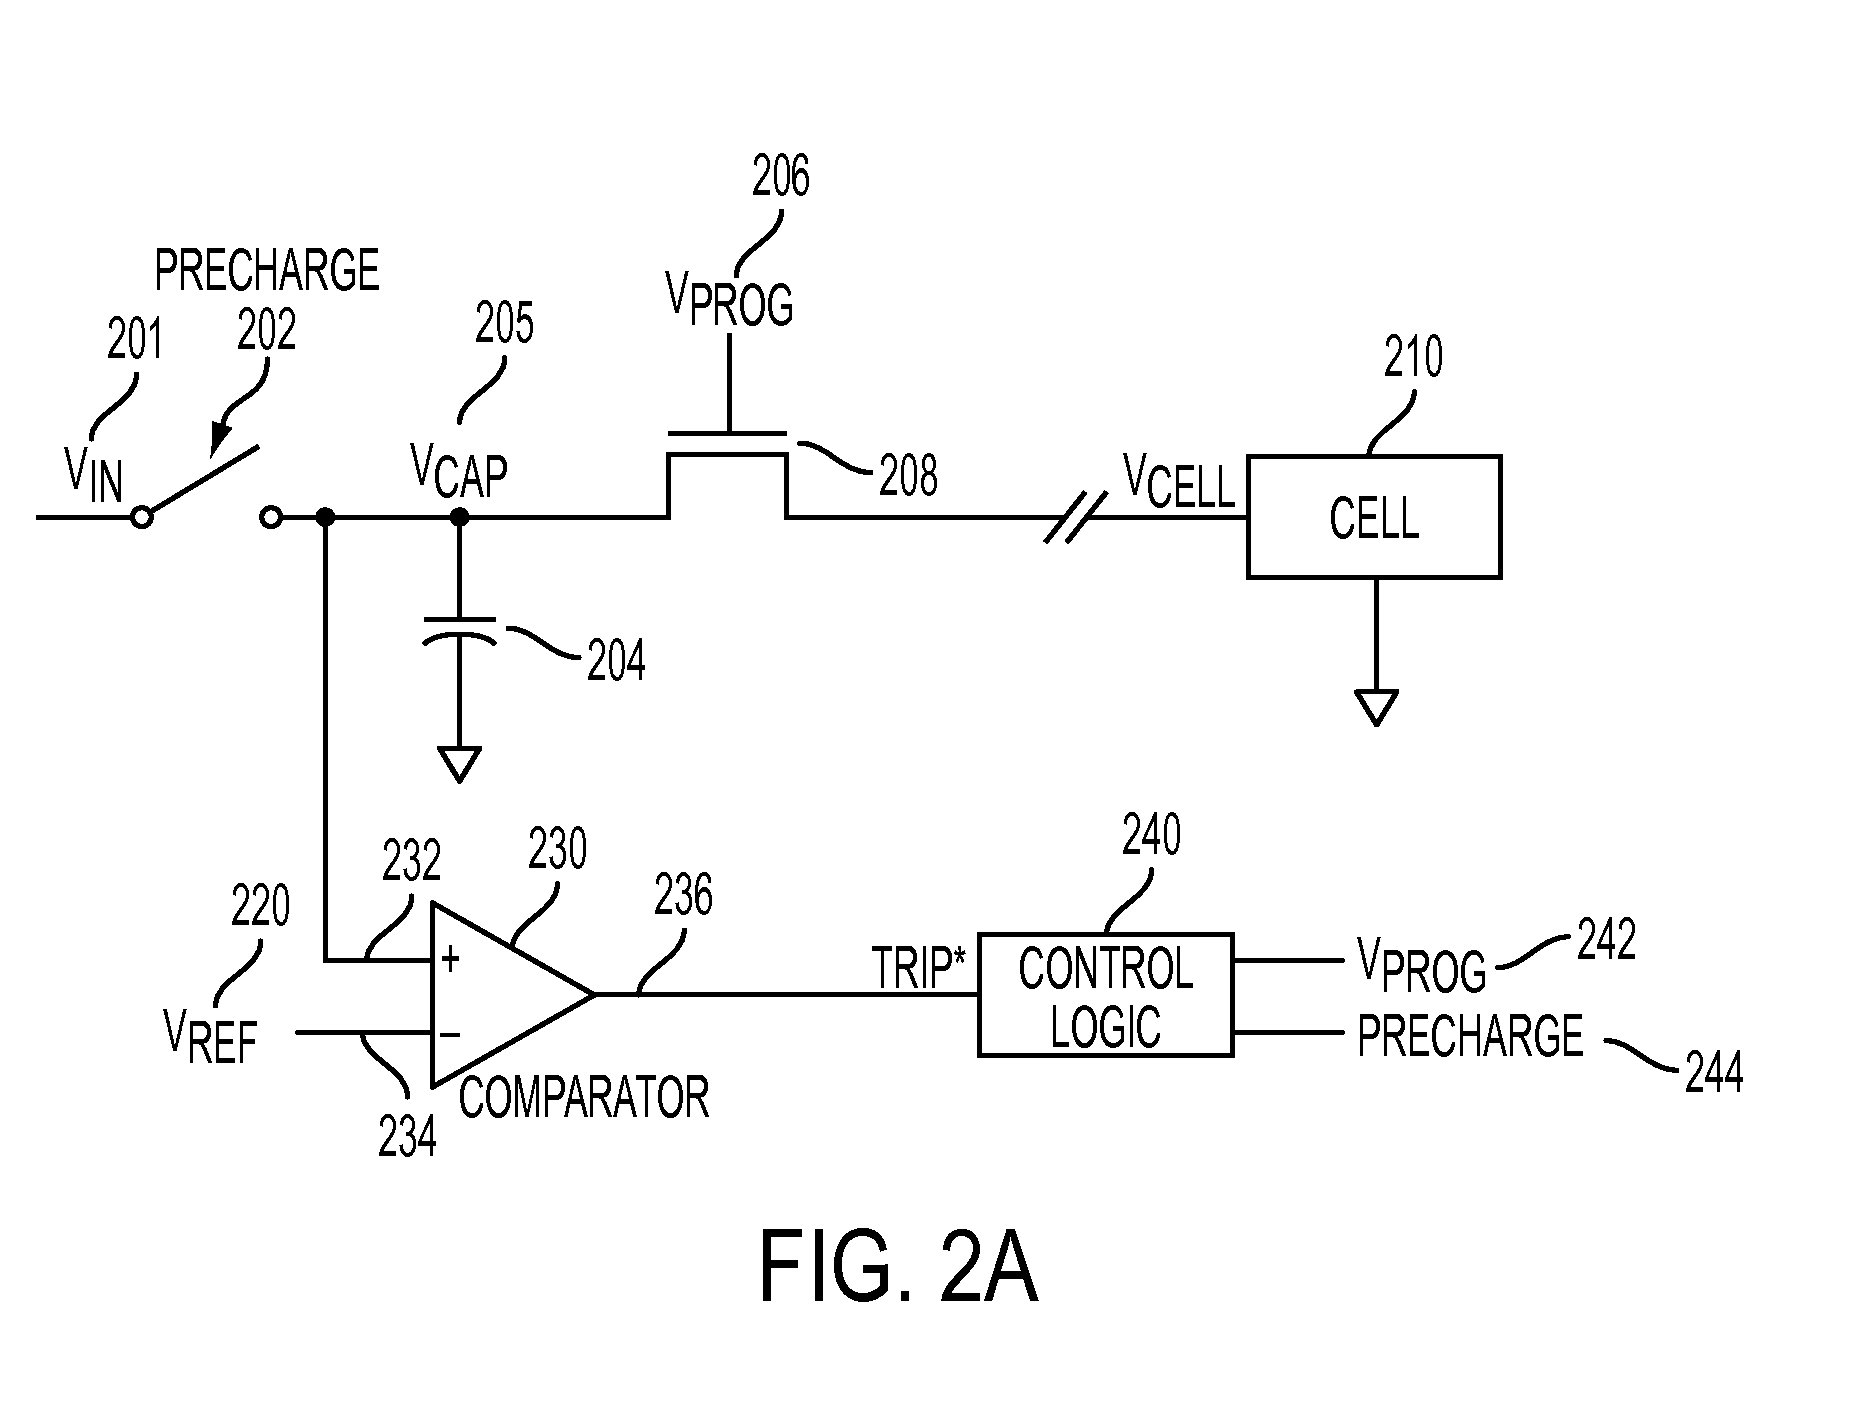 Apparatus and methods for forming a memory cell using charge monitoring